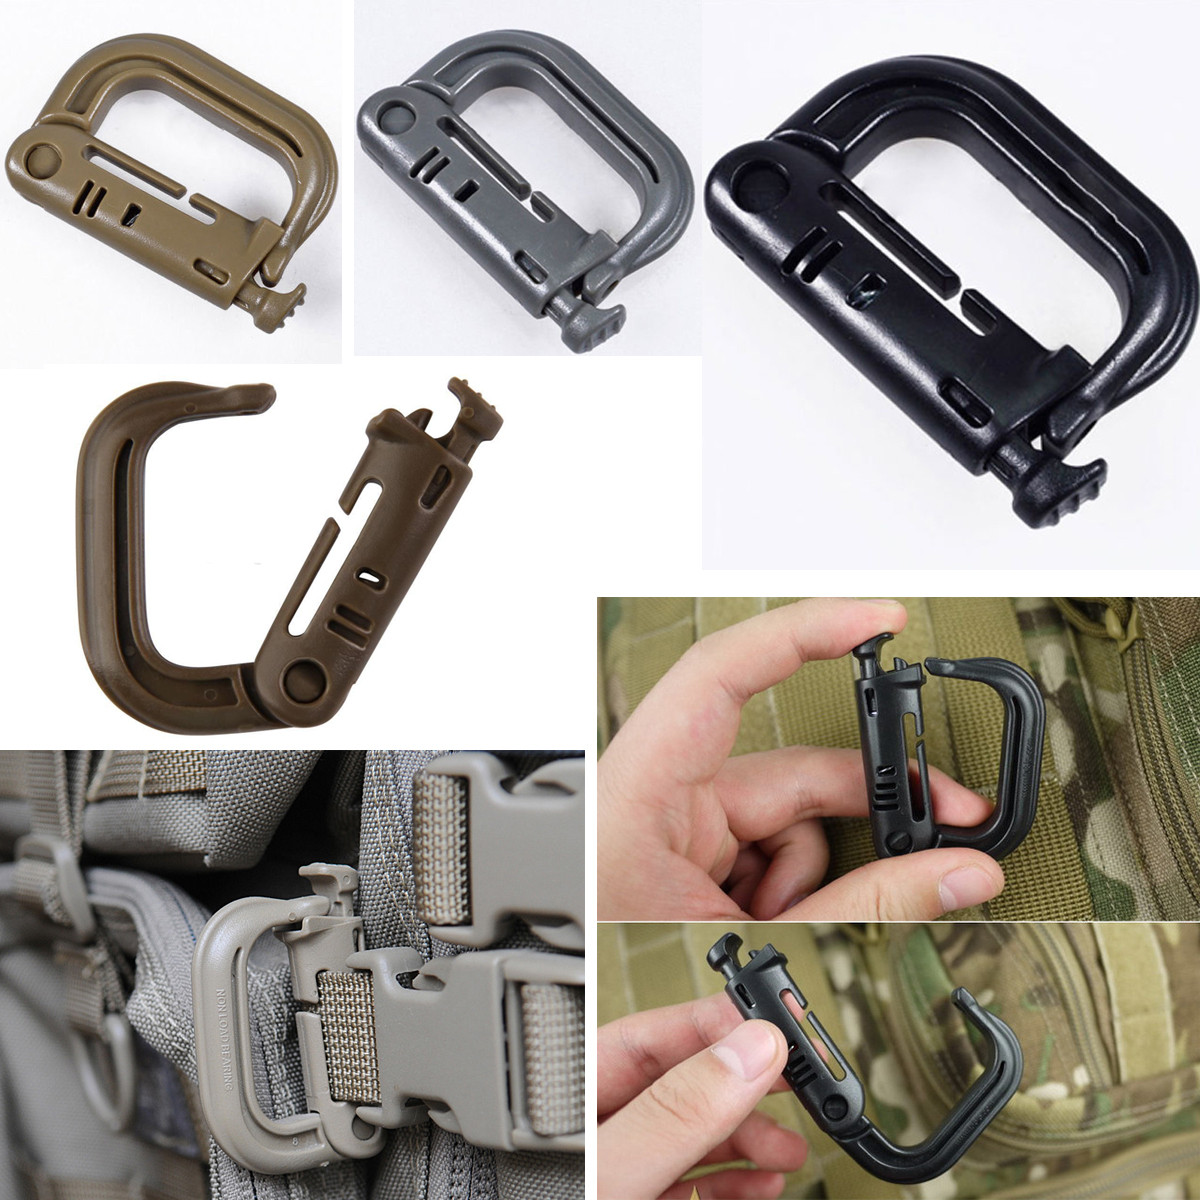 CAMTOA-Max-Load-90kg-D-Ring-Hook-Mountaineering-Buckle-Key-Chain-Outdoor-Climbing-Carabiner-Tactical-1885104-1